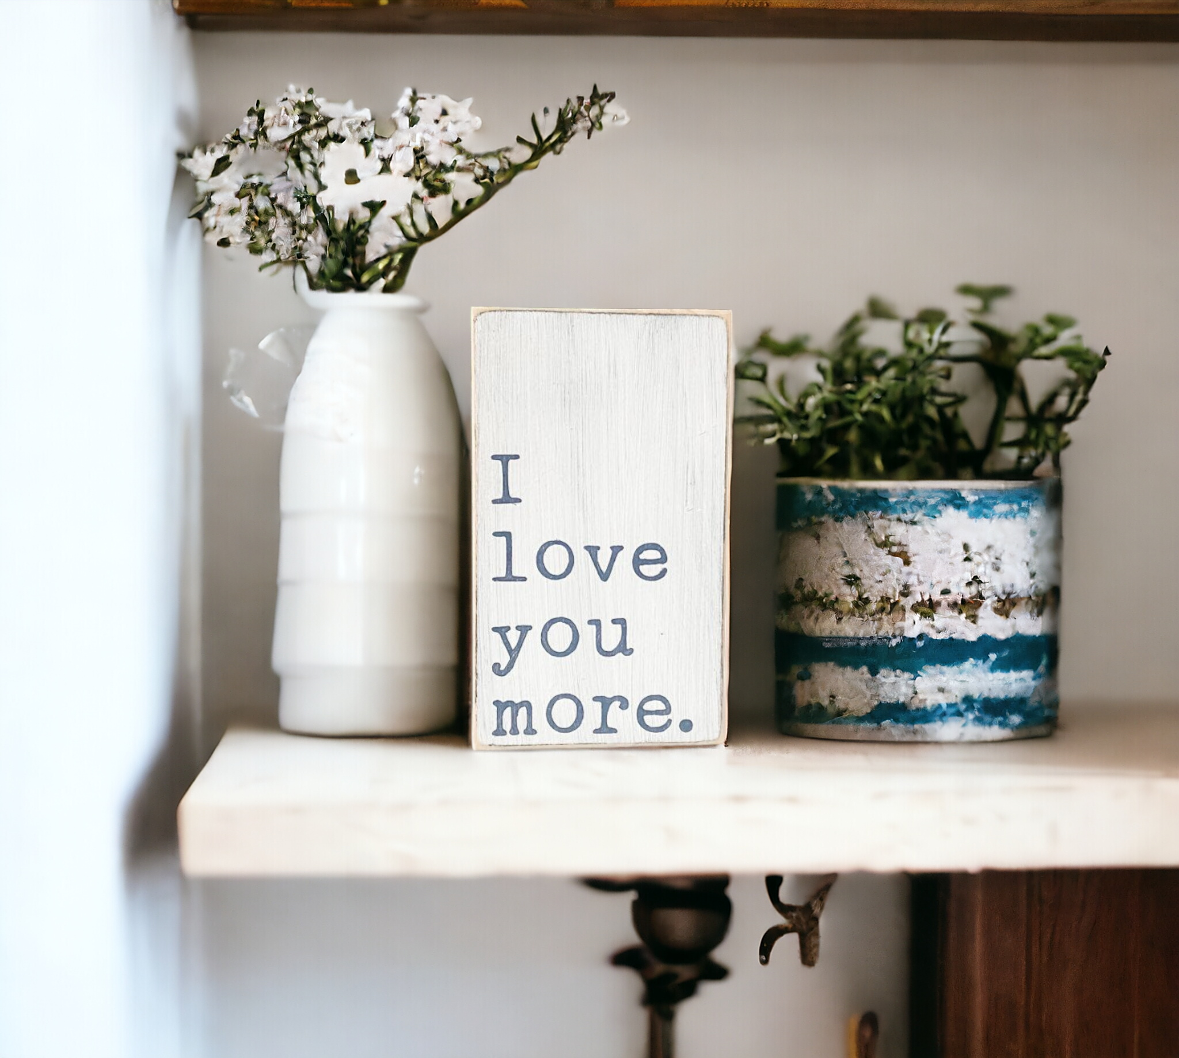 A 3.5" x 6" small wood sign with a white background and bluish gray text that reads, 'I love you more.' This versatile small wood sign adds a farmhouse-style touch to any space and makes a heartfelt gift for expressing your love.